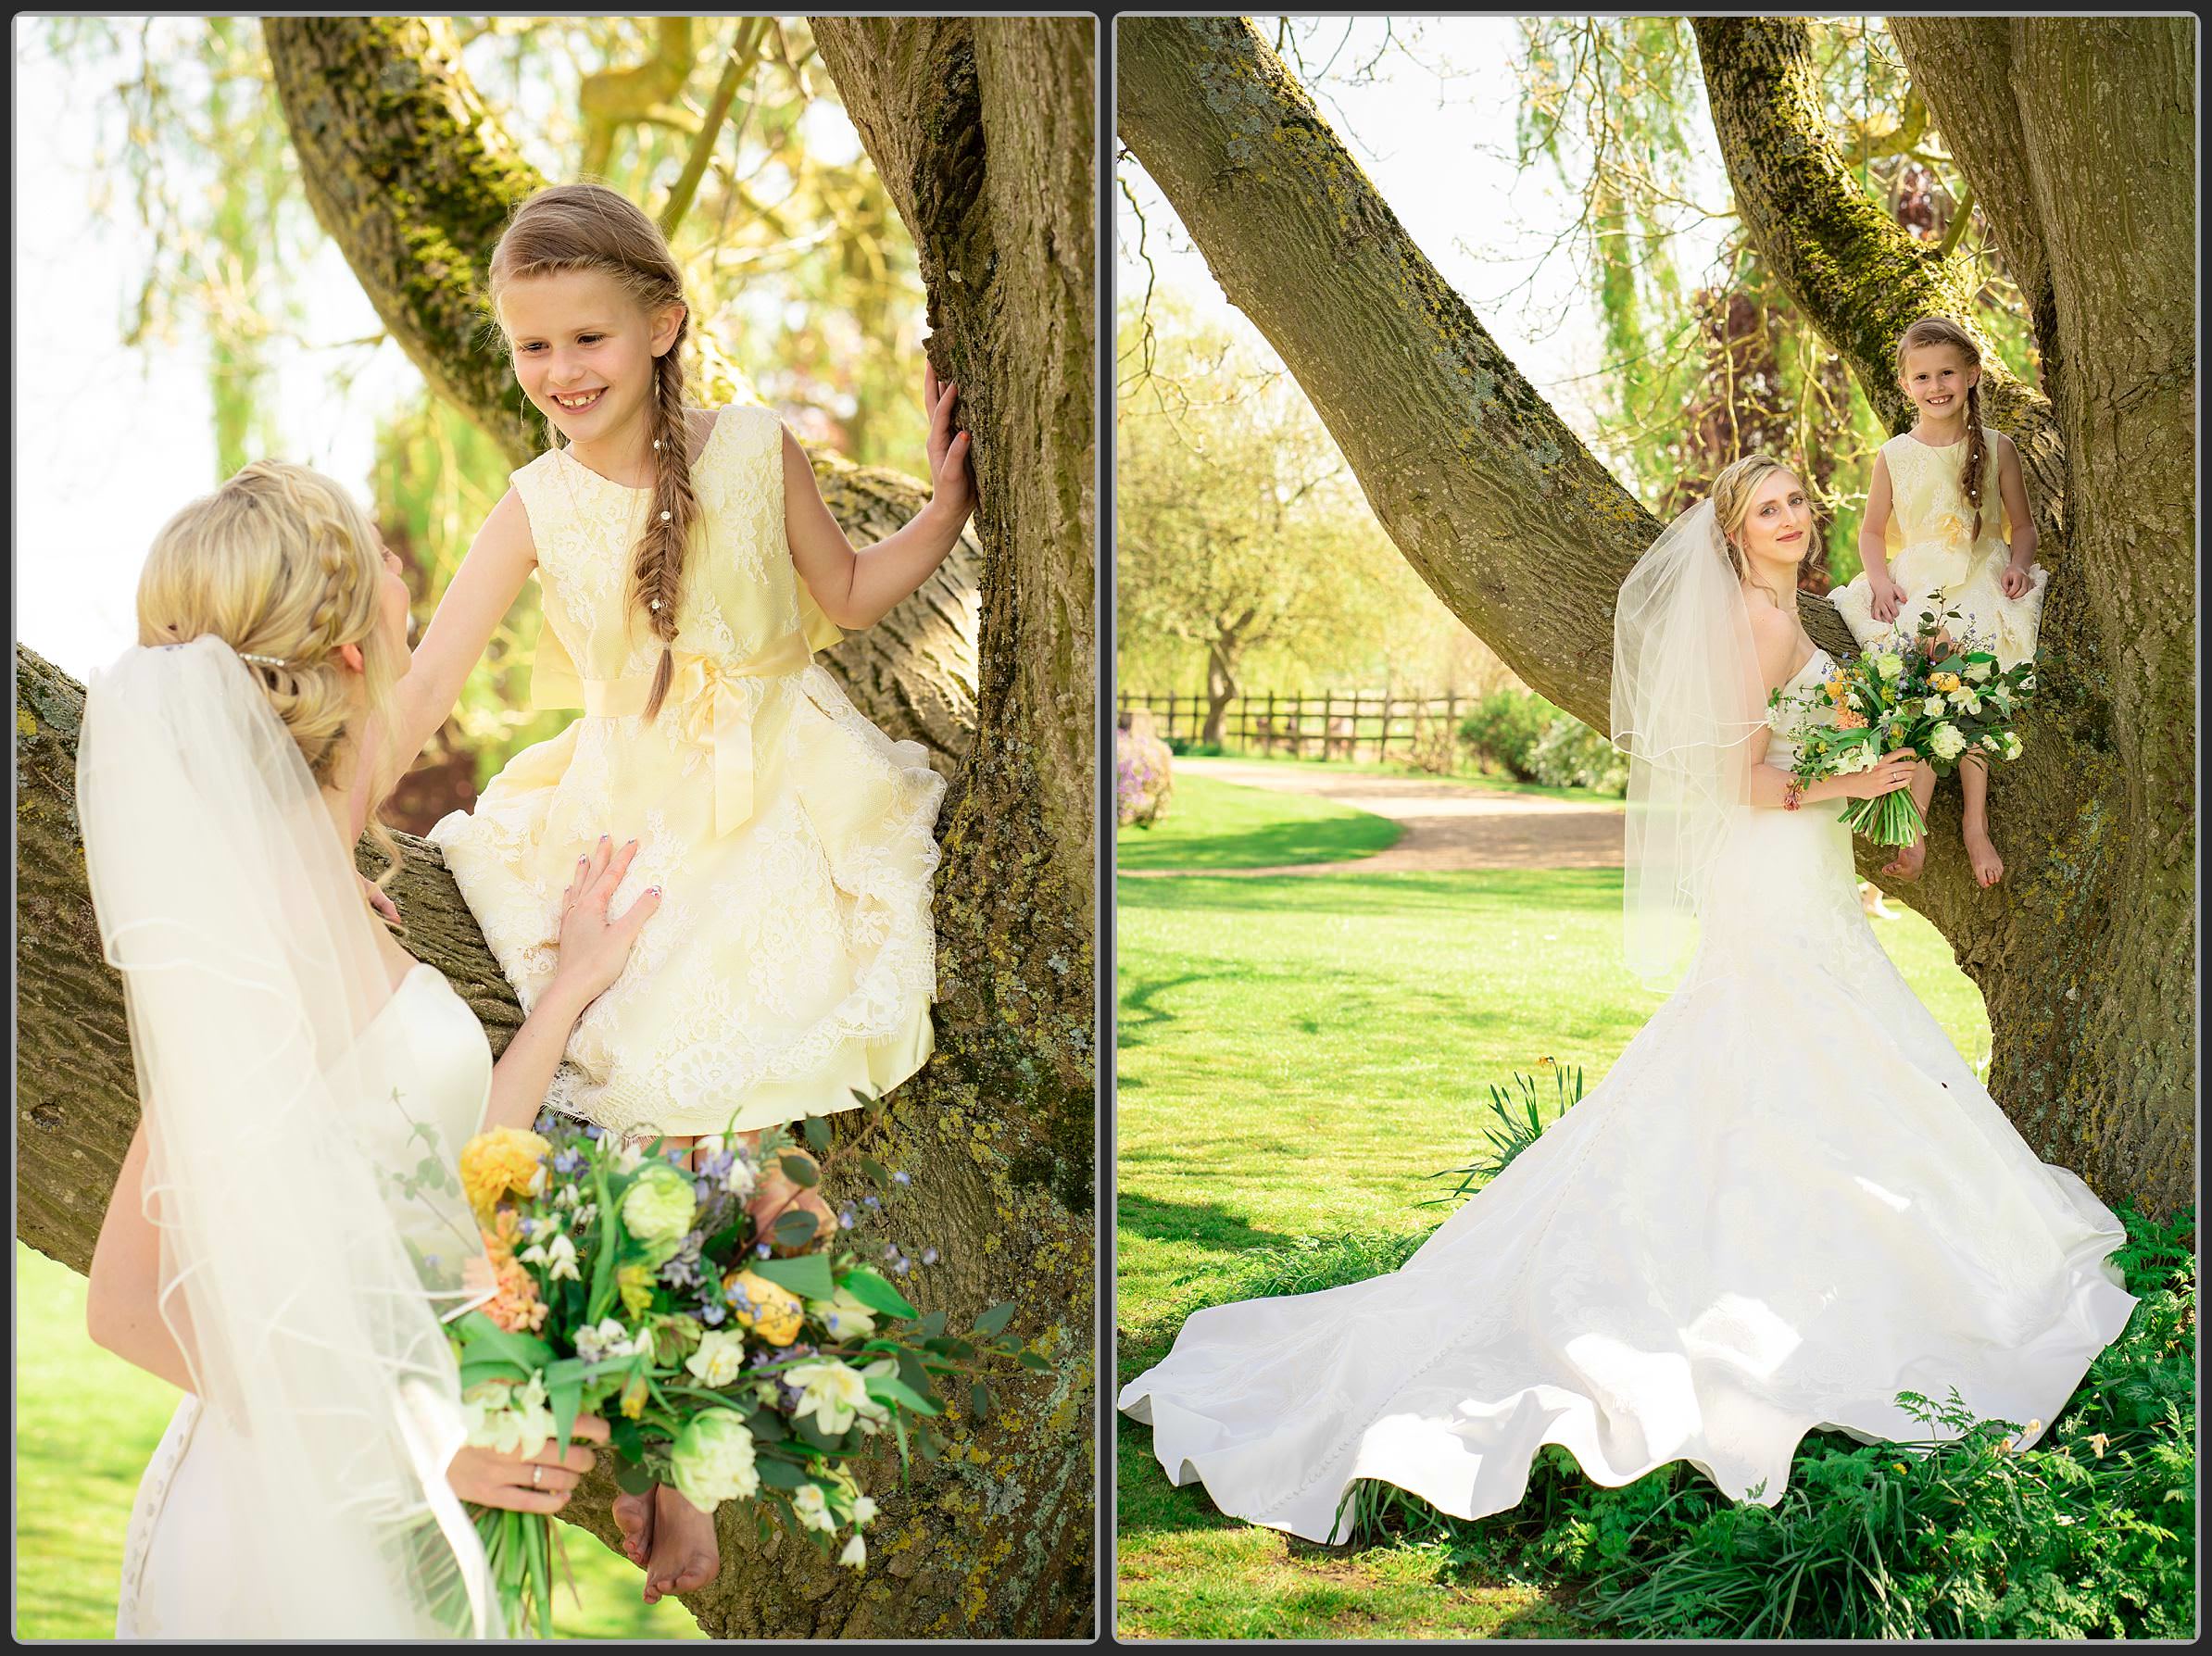 The bride and her flower girl in the tree